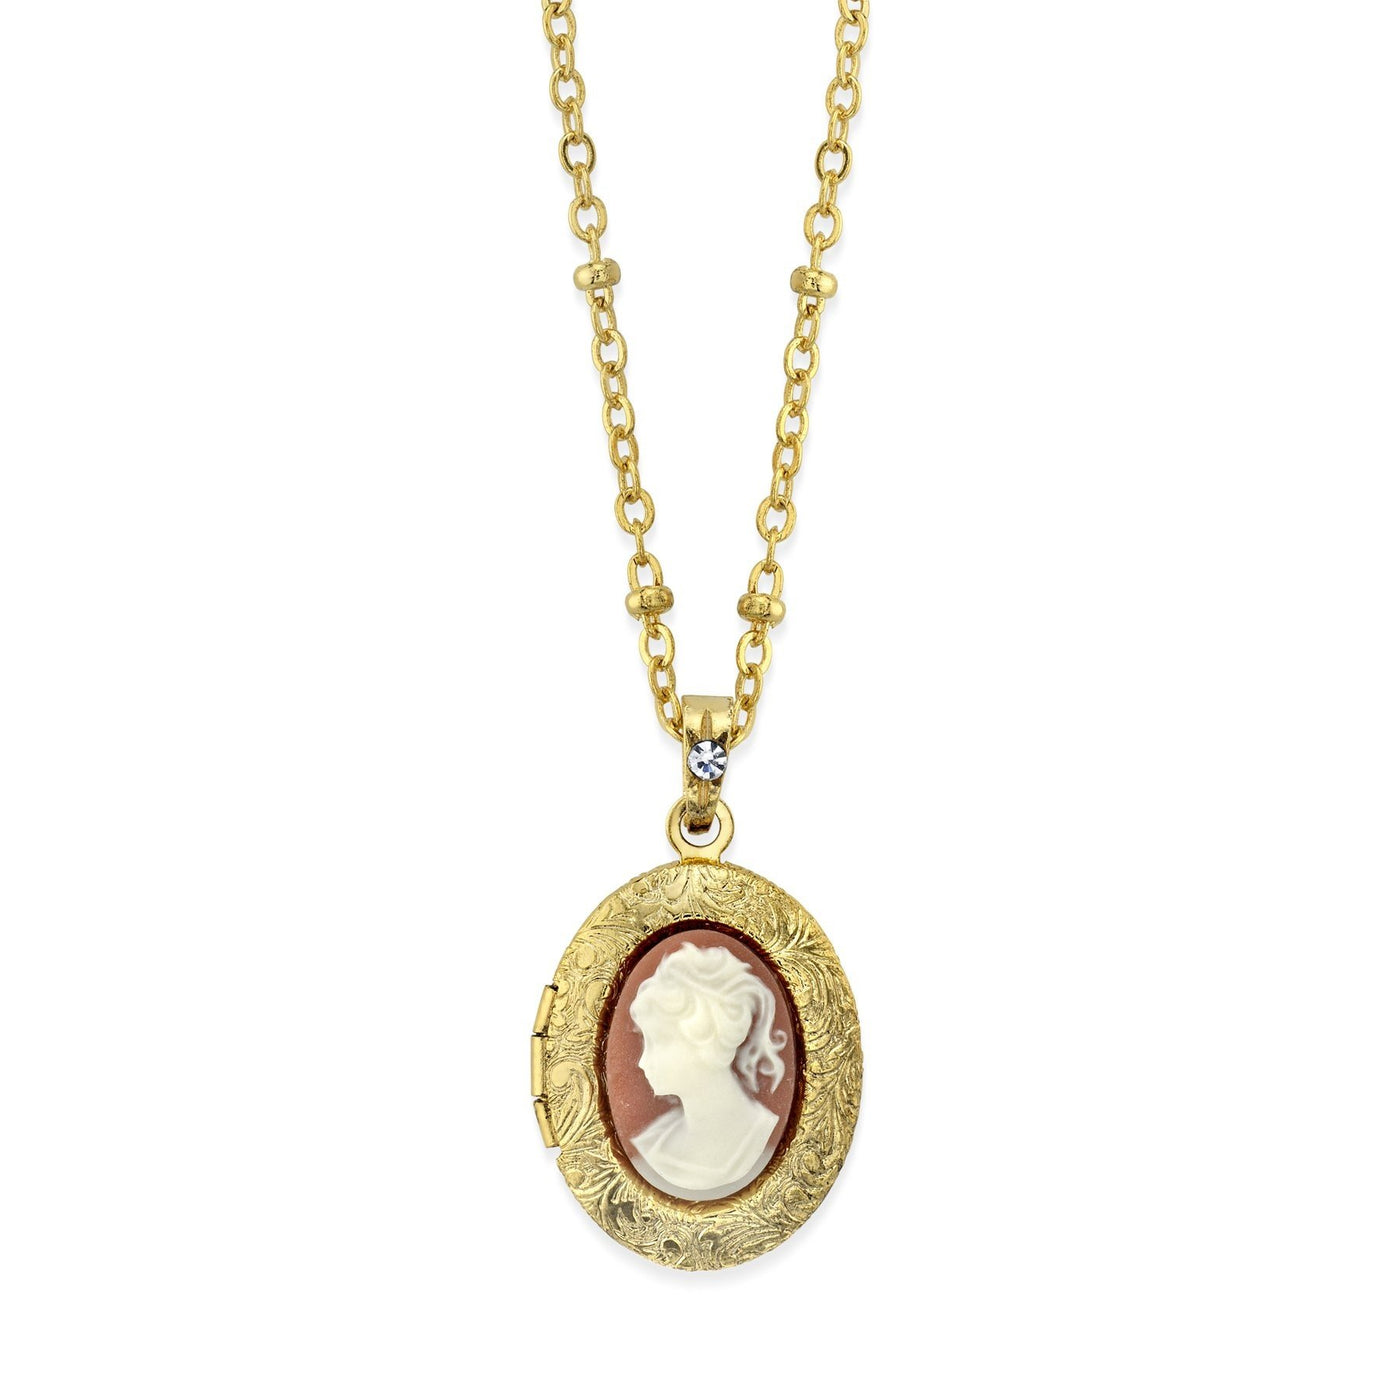 DOWNTON ABBEY OVAL CAMEO LOCKET NECKLACE